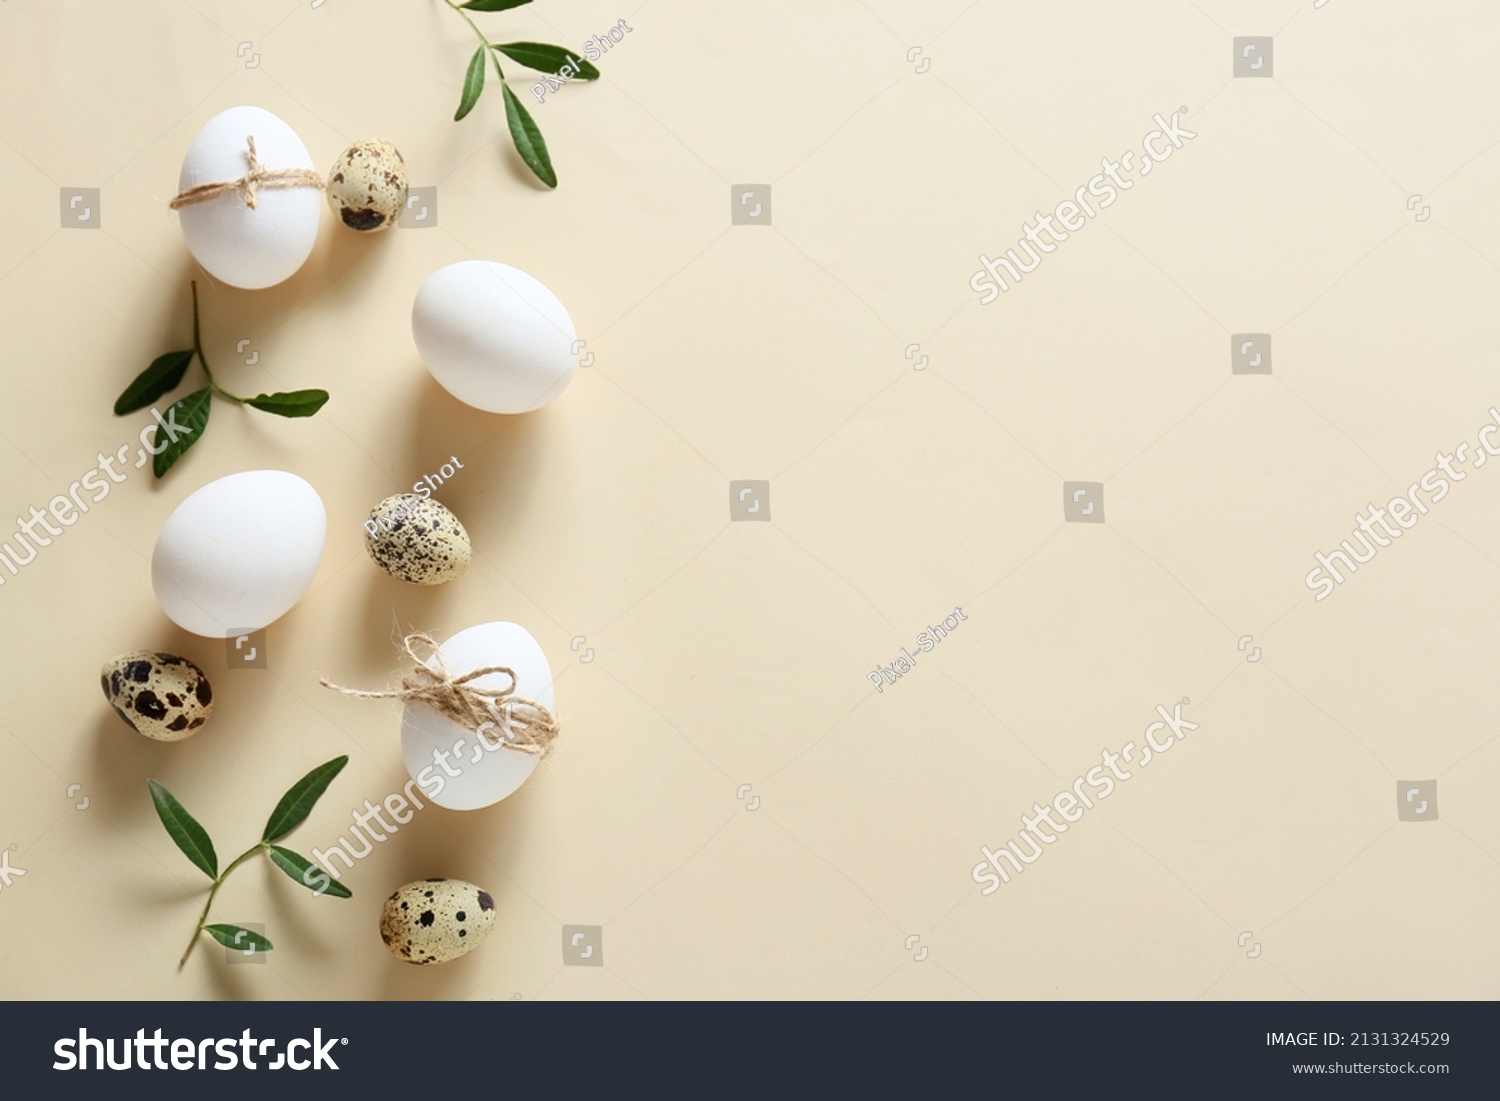 Composition with Easter eggs and green branches on beige background #2131324529